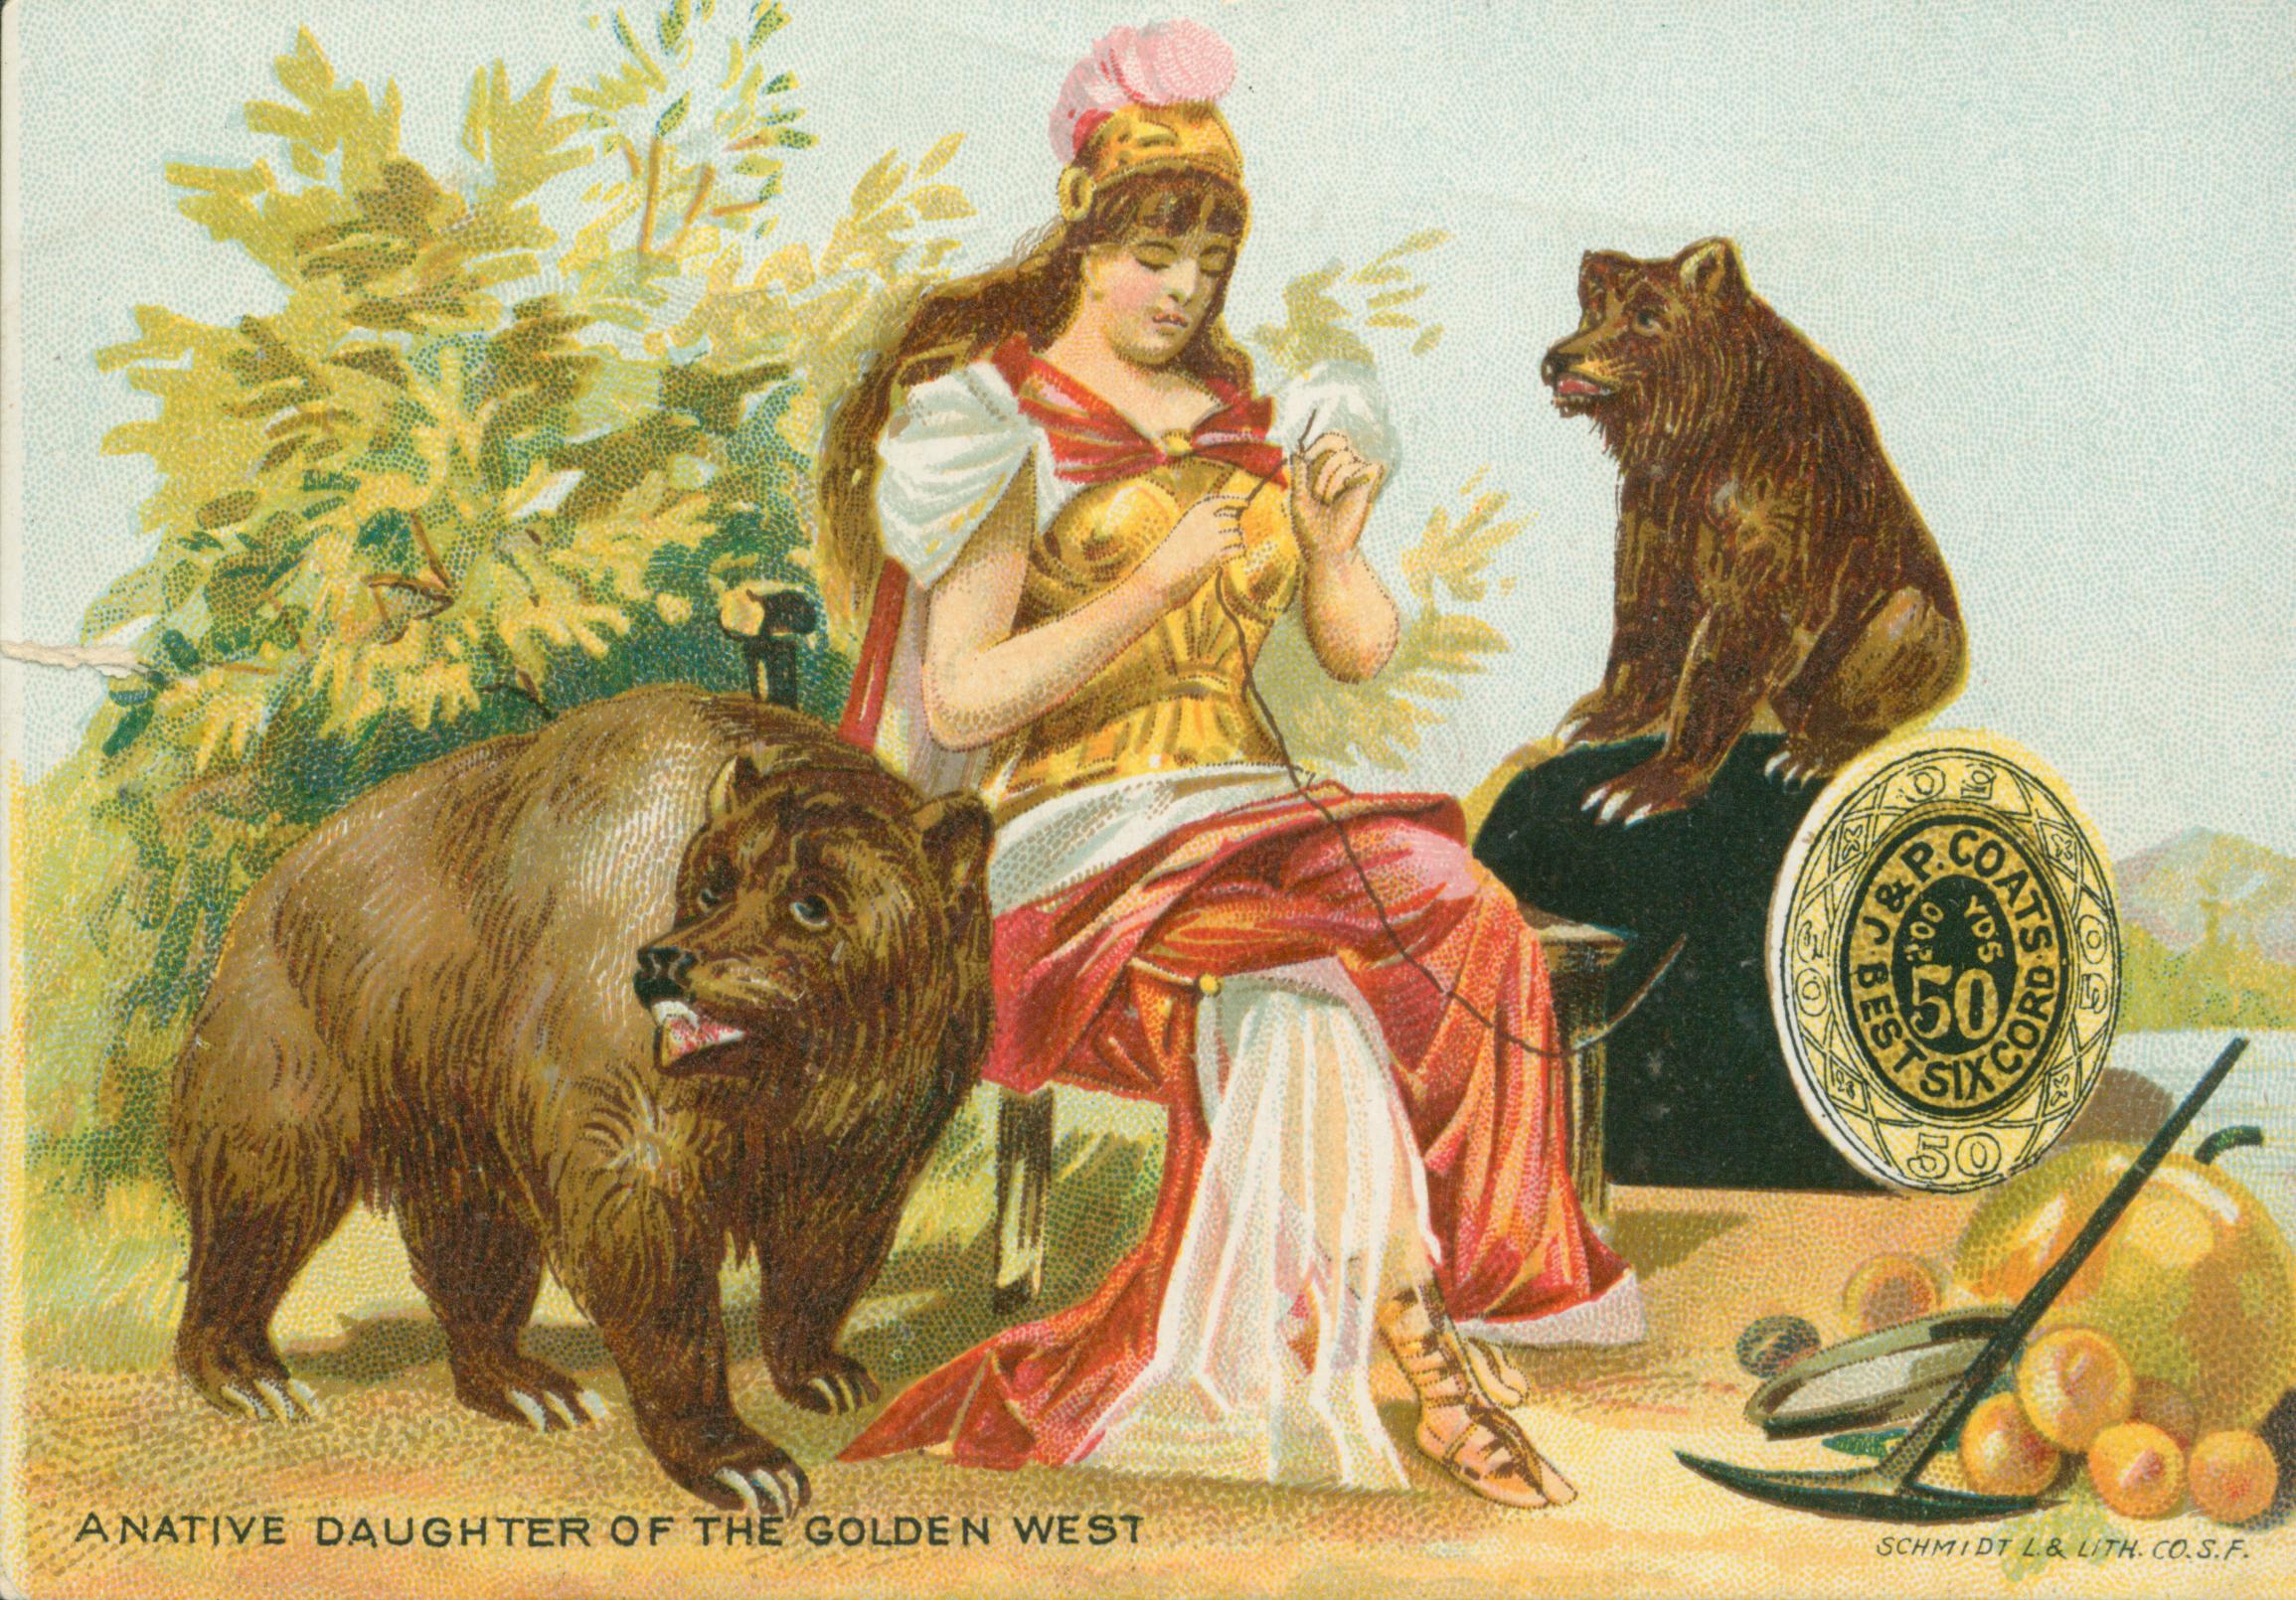 This trade card shows a woman dressed as Minerva, threading a needle with J & P Coats thread while two bears look on.